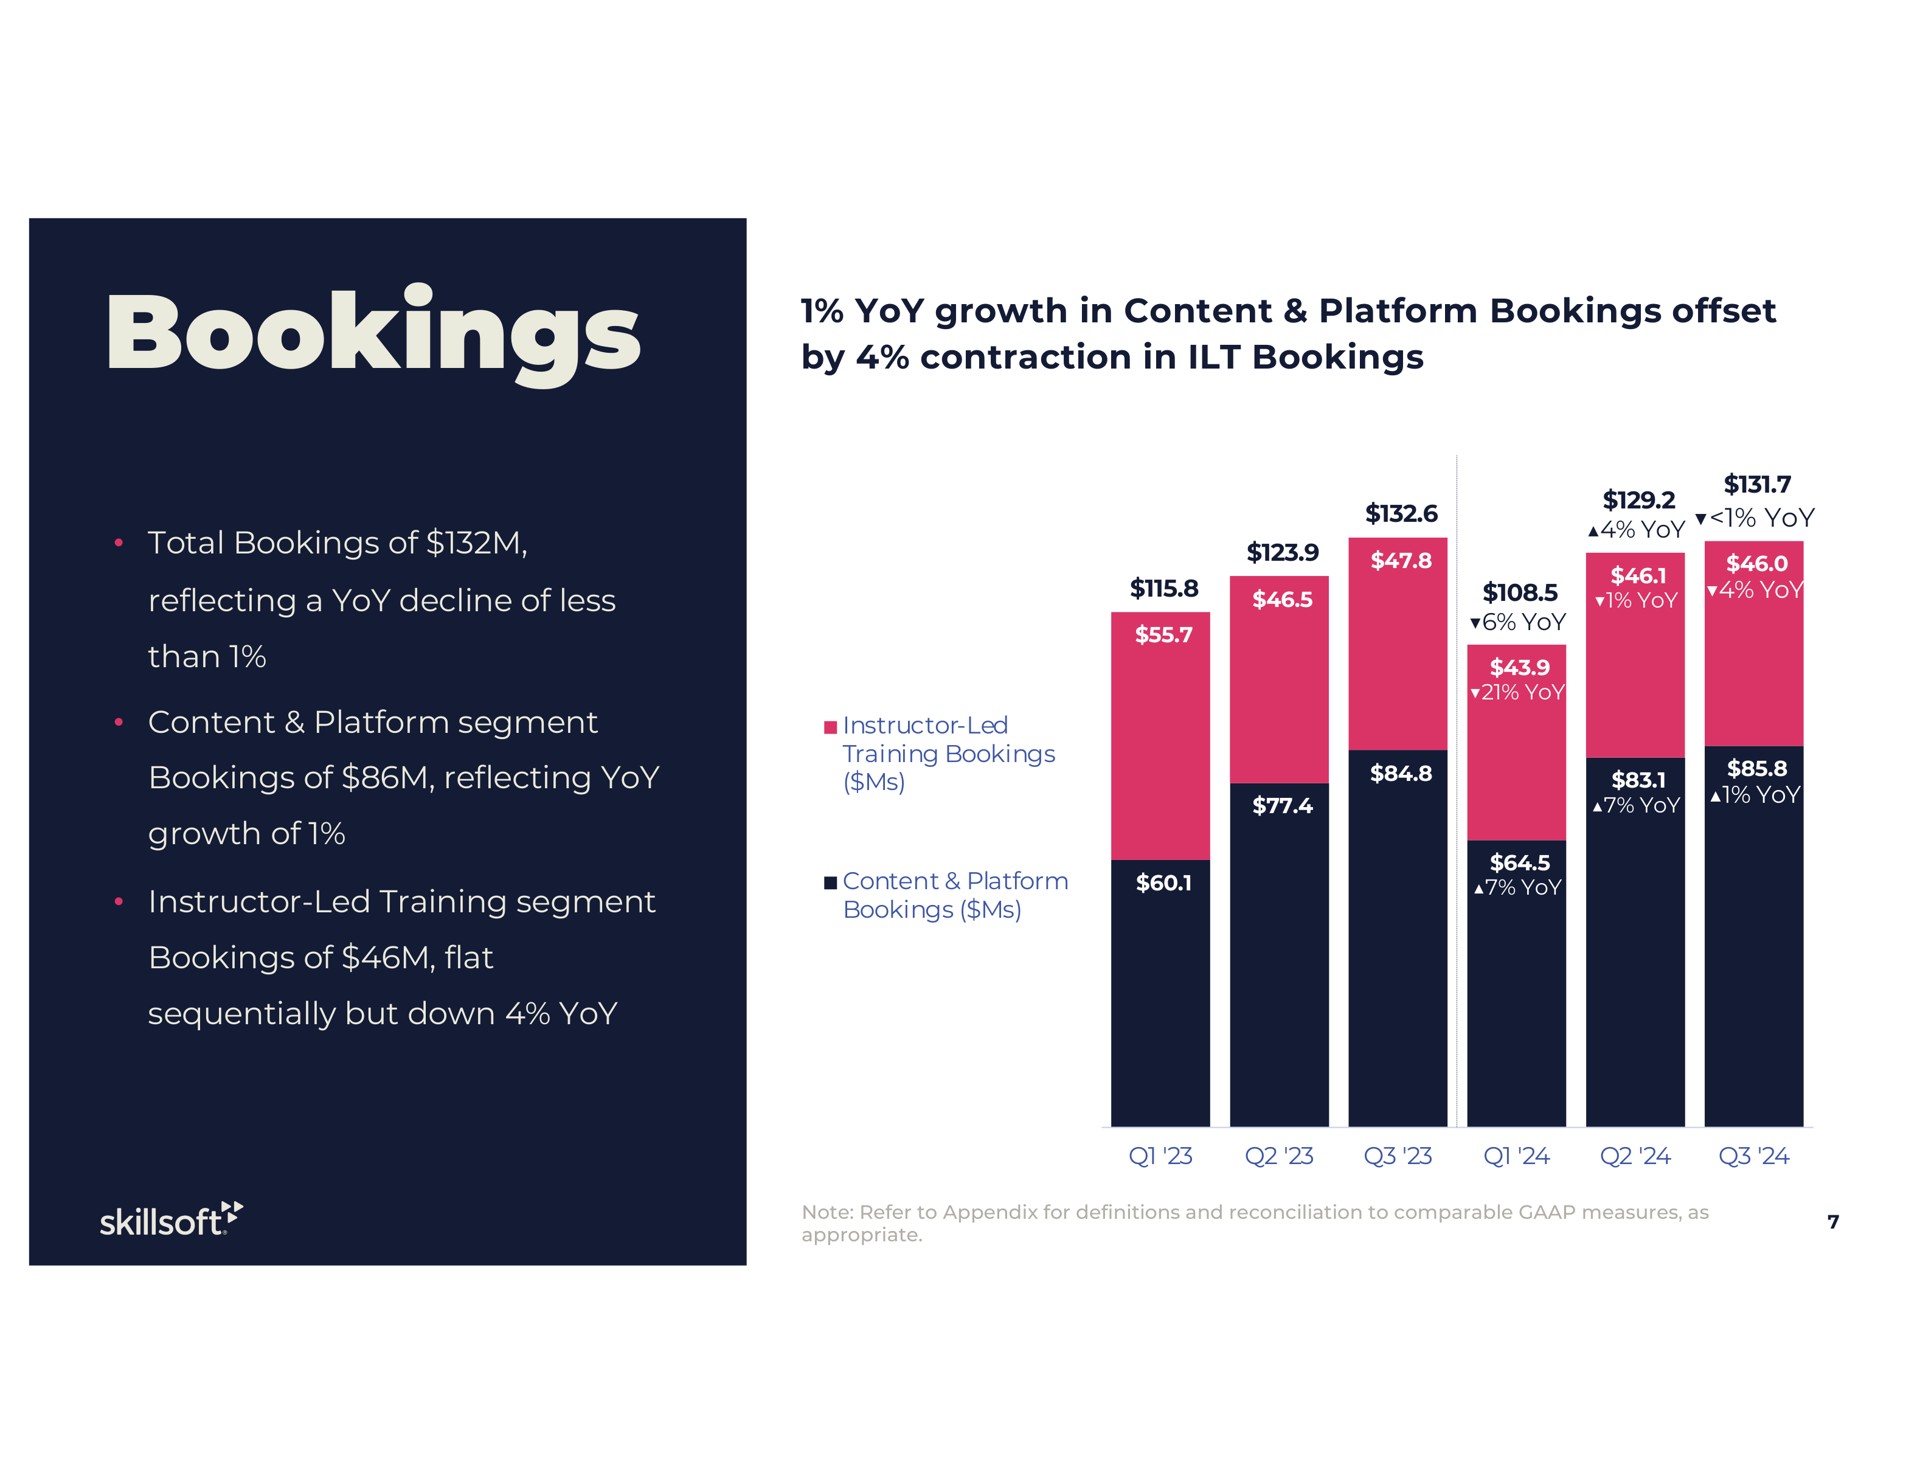 bookings yoy growth in content platform bookings offset by contraction in bookings | Skillsoft